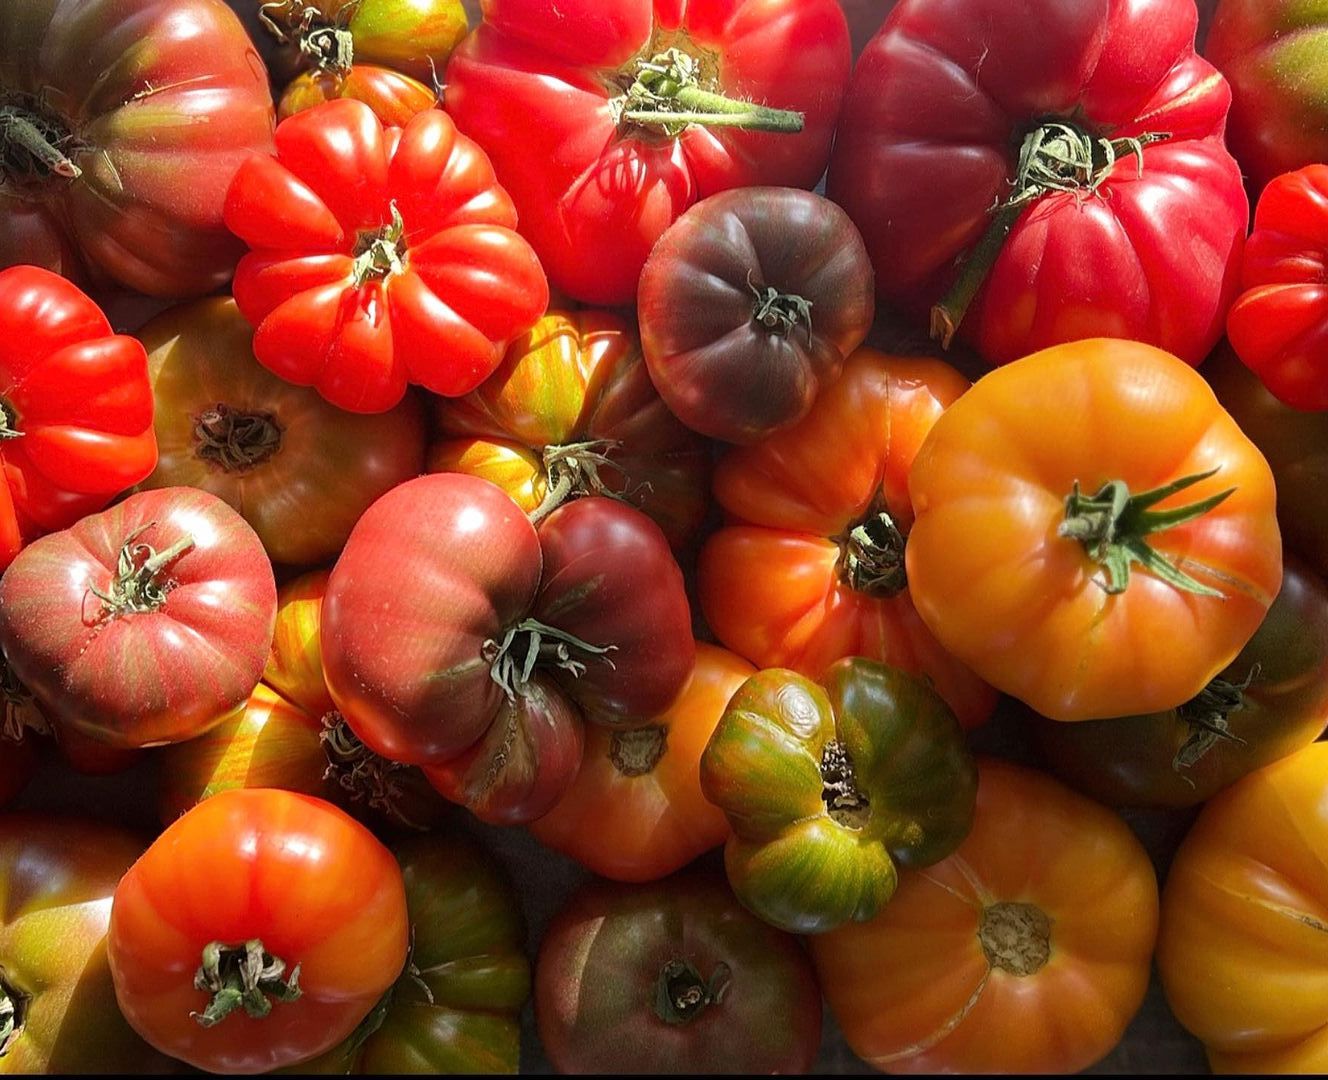 a variety of red, orange, yellow and green tomatoes